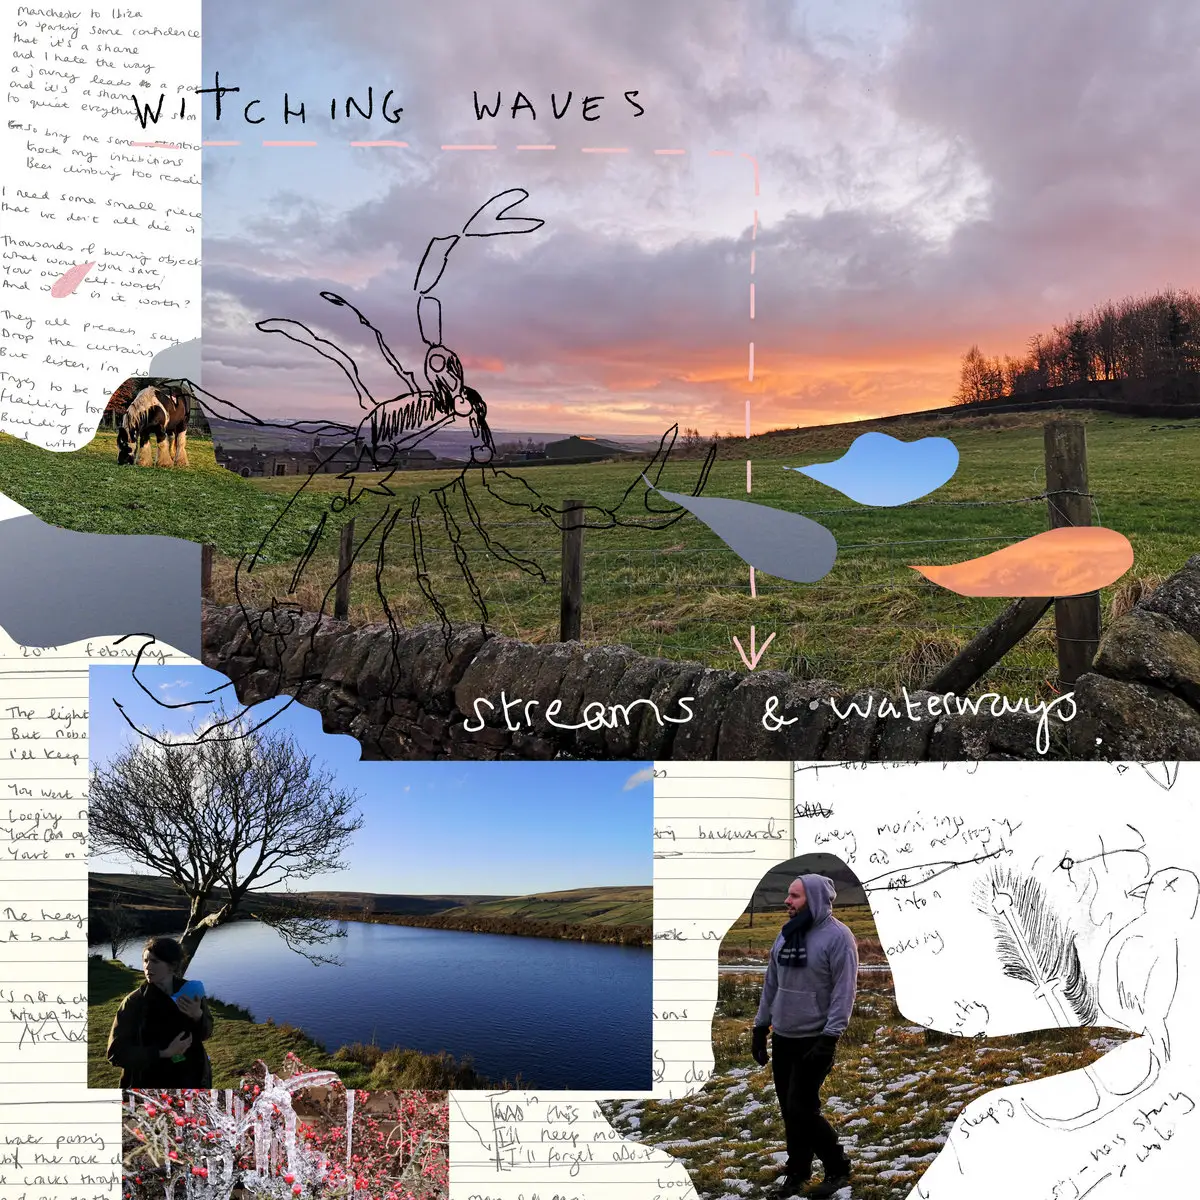 <strong>Witching Waves - Streams and Waterways</strong> (Vinyl LP - orange)